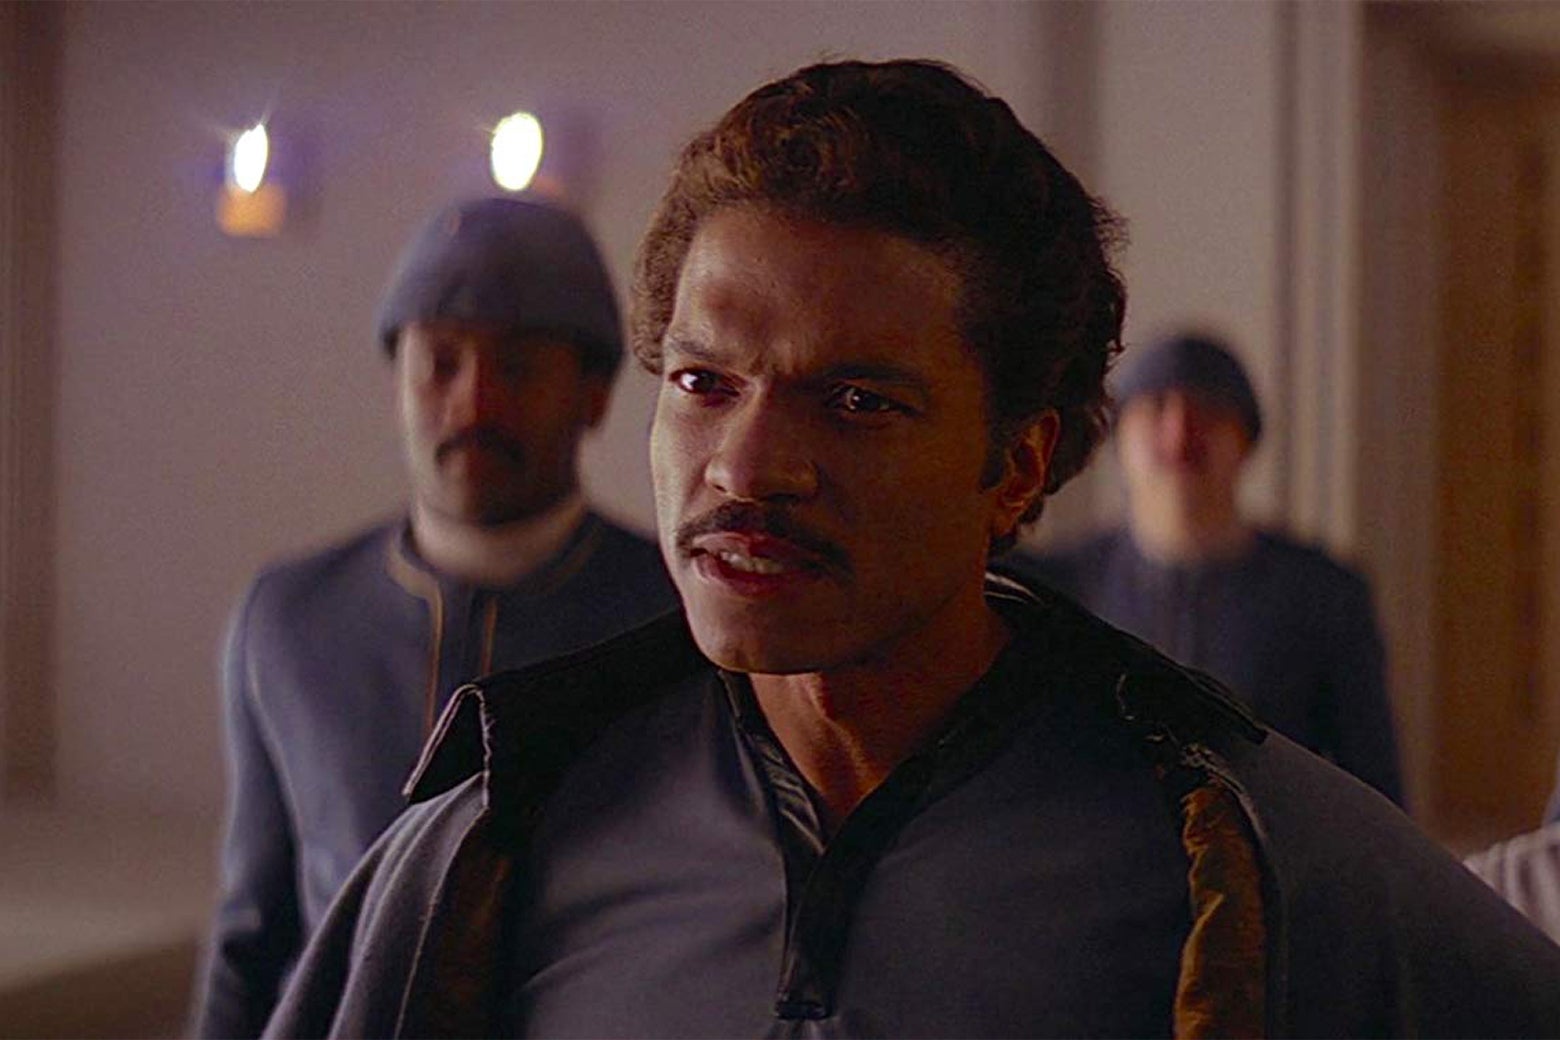 Billy Dee Williams as Lando Calrissian in The Empire Strikes Back.